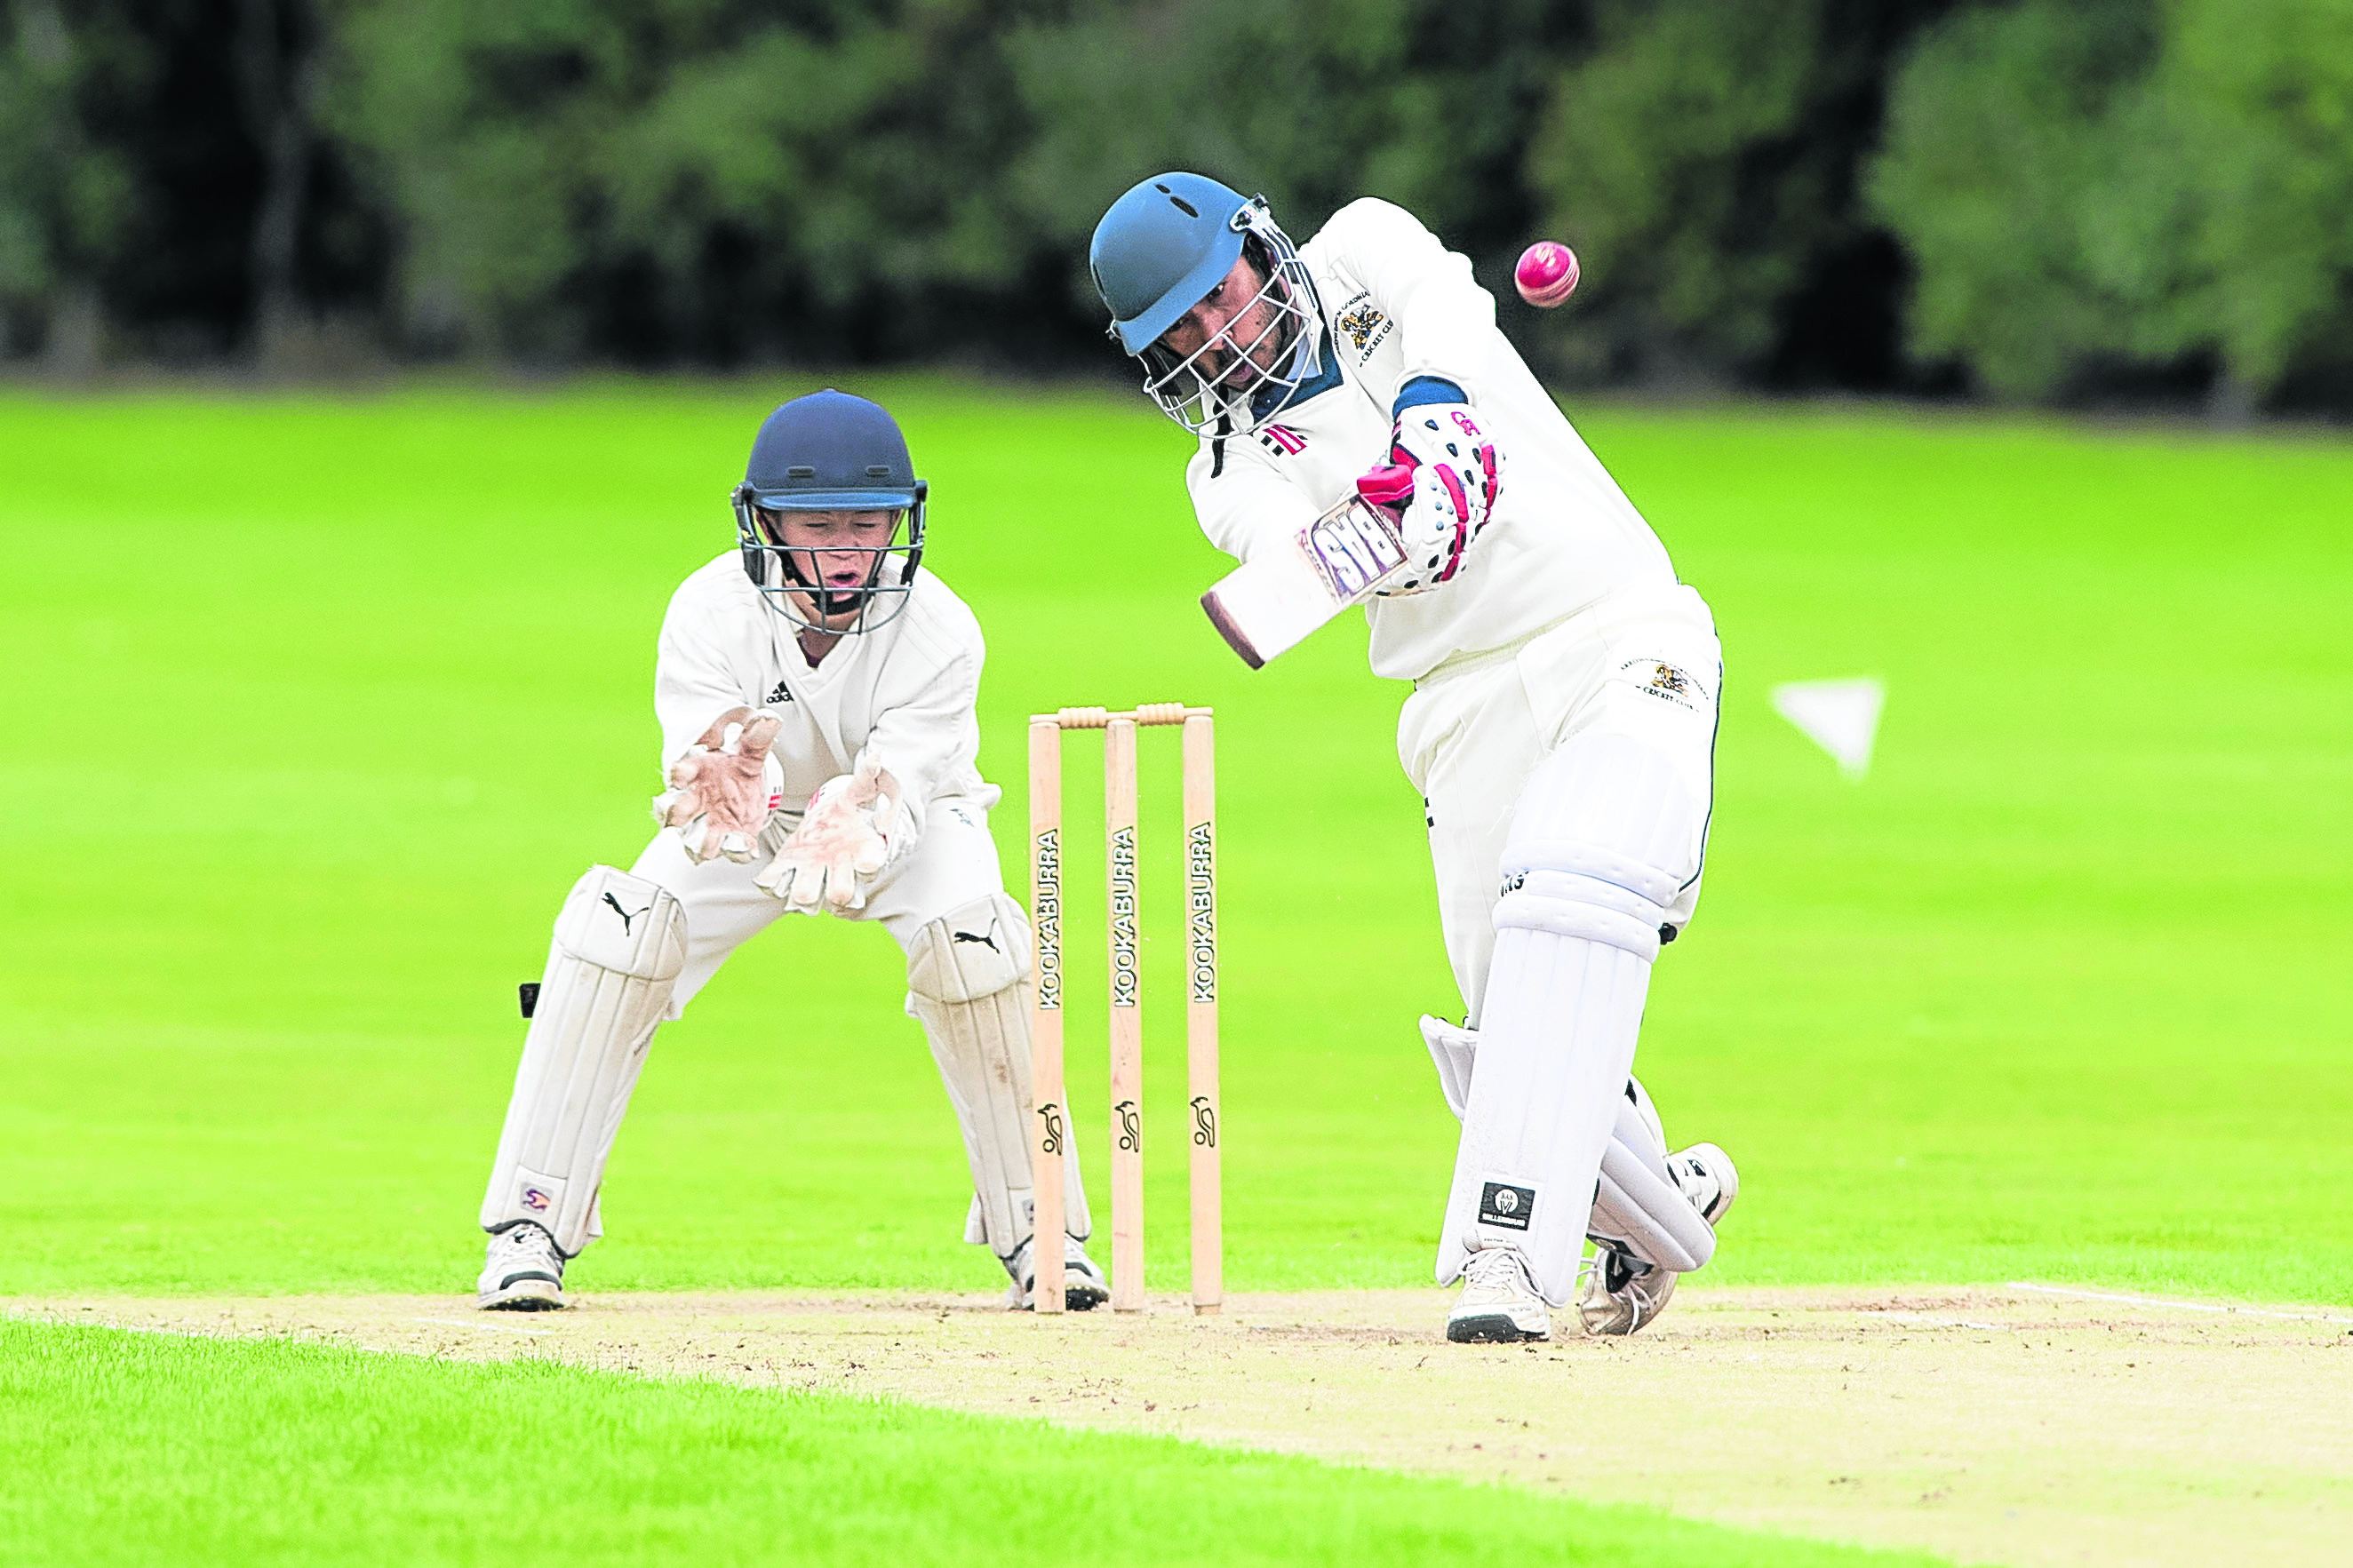 Gordonians want to make sure there's a plentiful supply of cricketing talent.